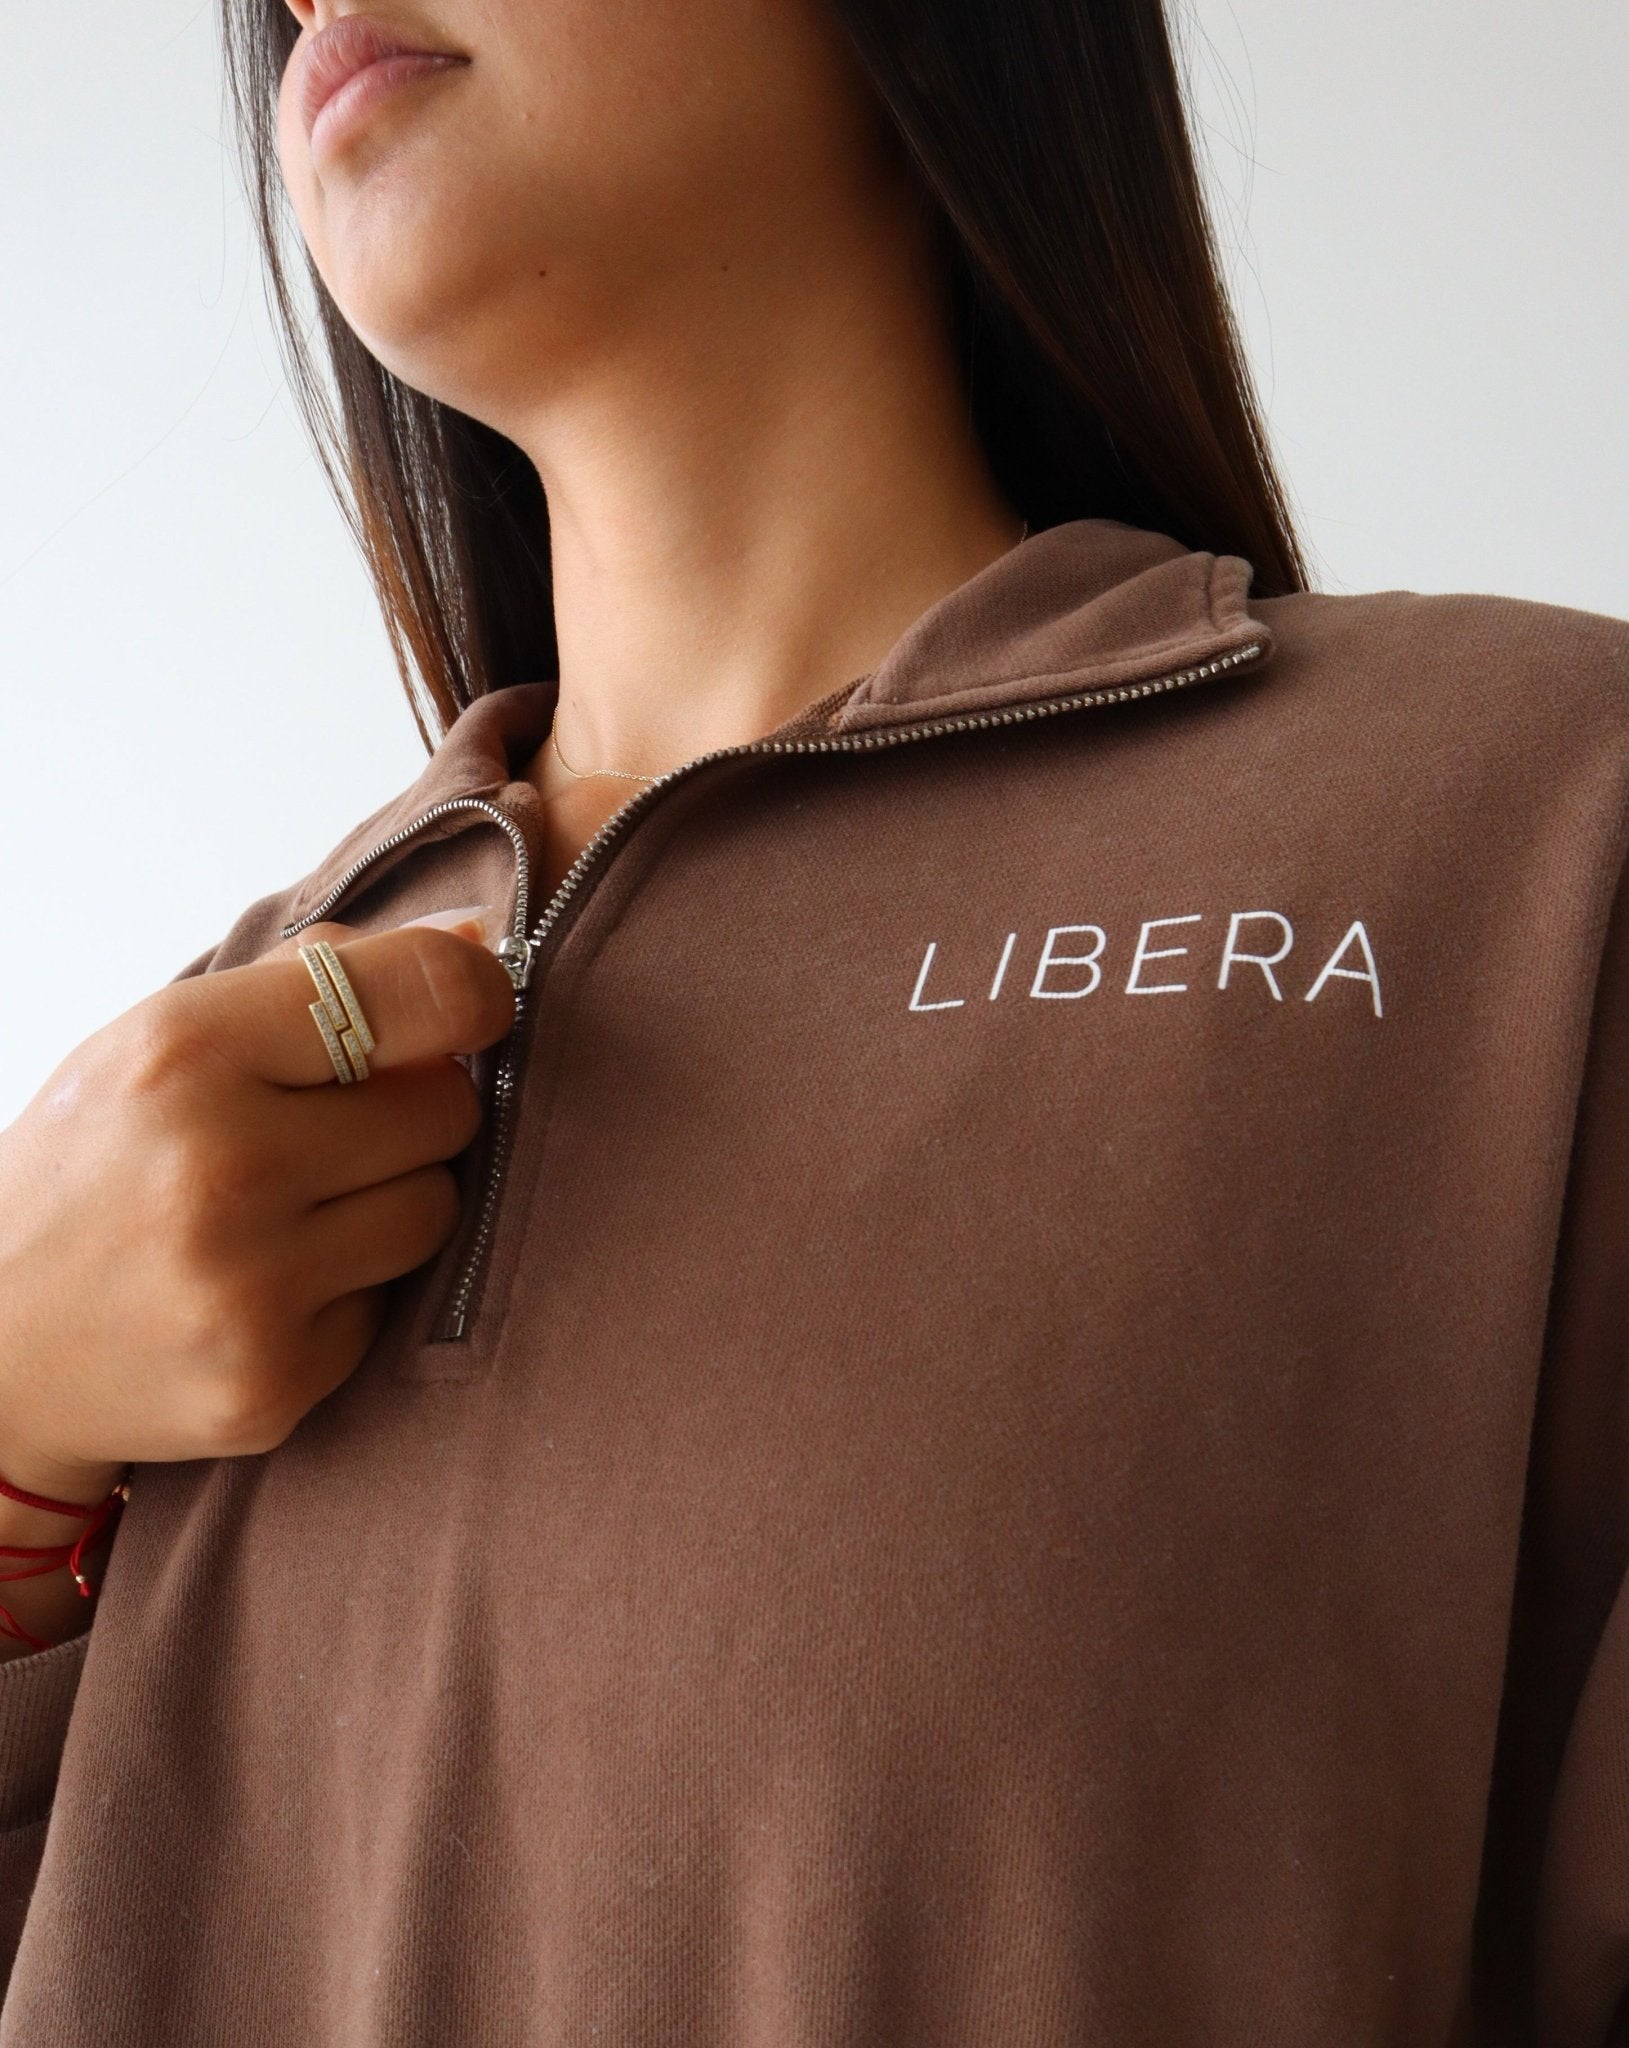 REFINE Quarter-Zip Sweater - MOCHA - LIBERA Fitness Apparel. Upgrade your comfort with our REFINE Quarter-Zip Sweater. Versatile and stylish design for any occasion.